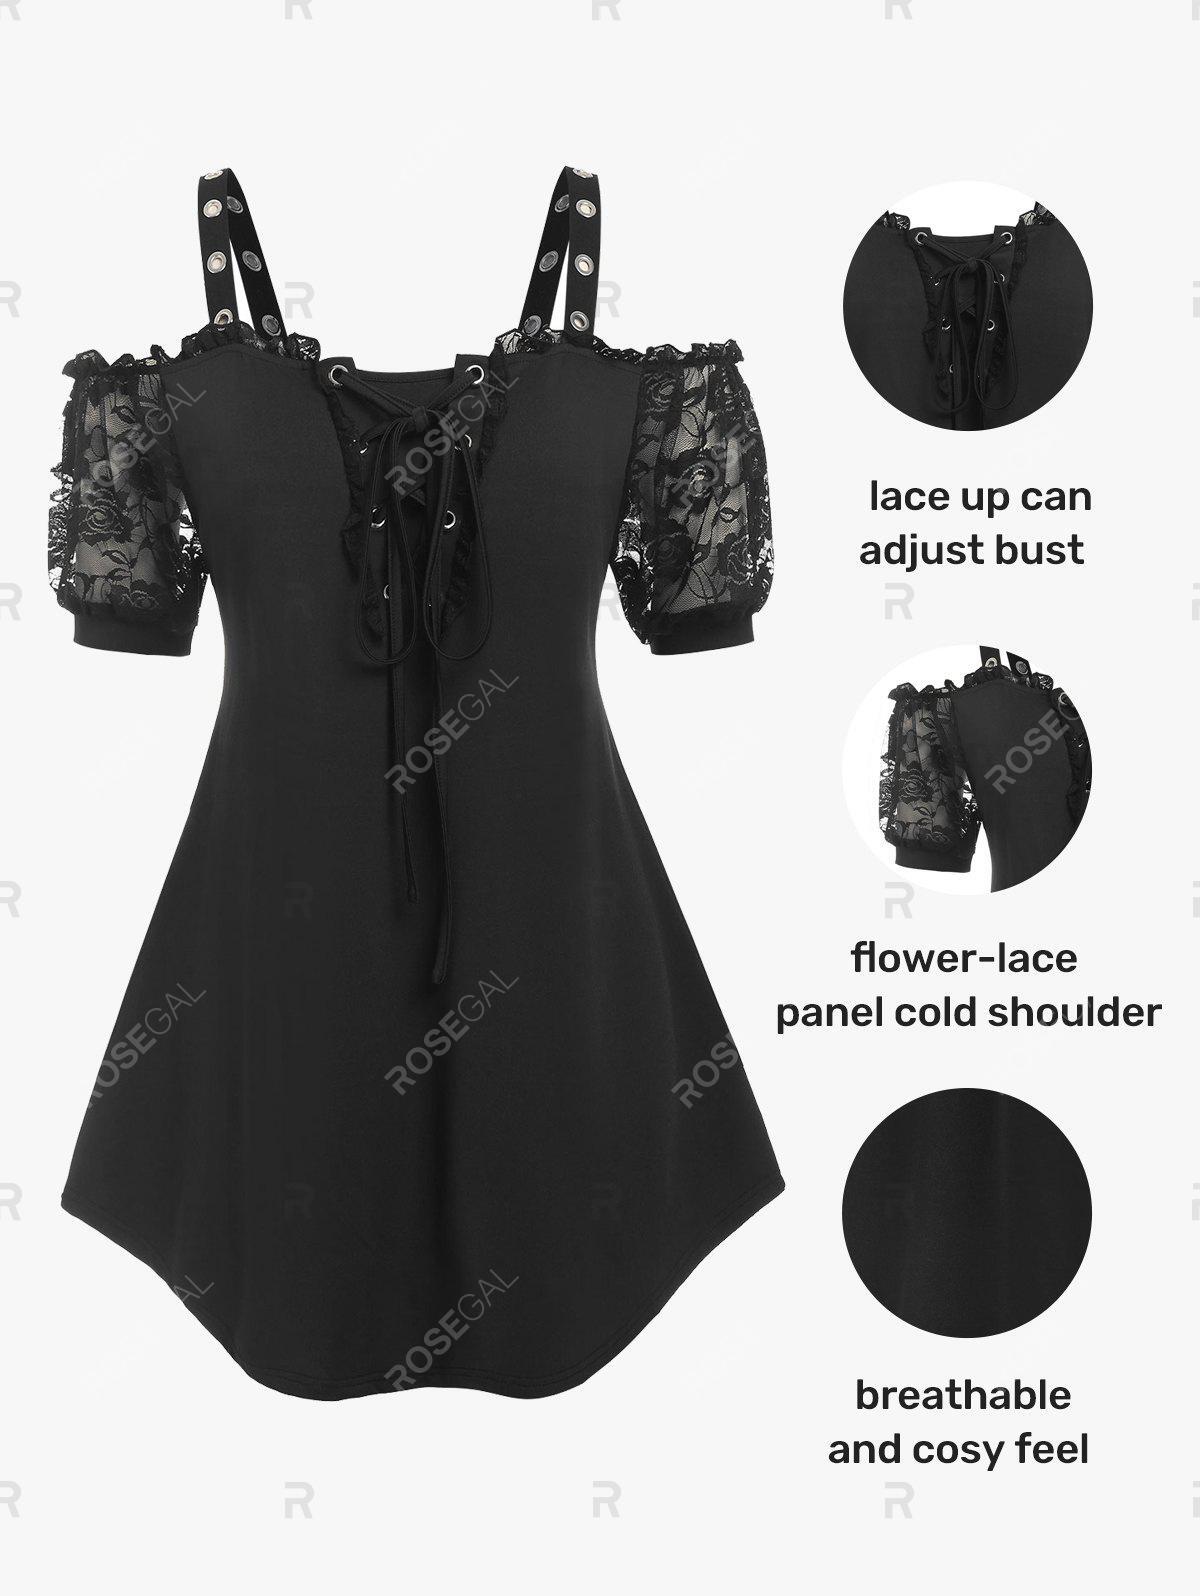 Lace Insert Lace-up Cold Shoulder Ruffle Tee and Leggings Gothic Plus Size Outfit